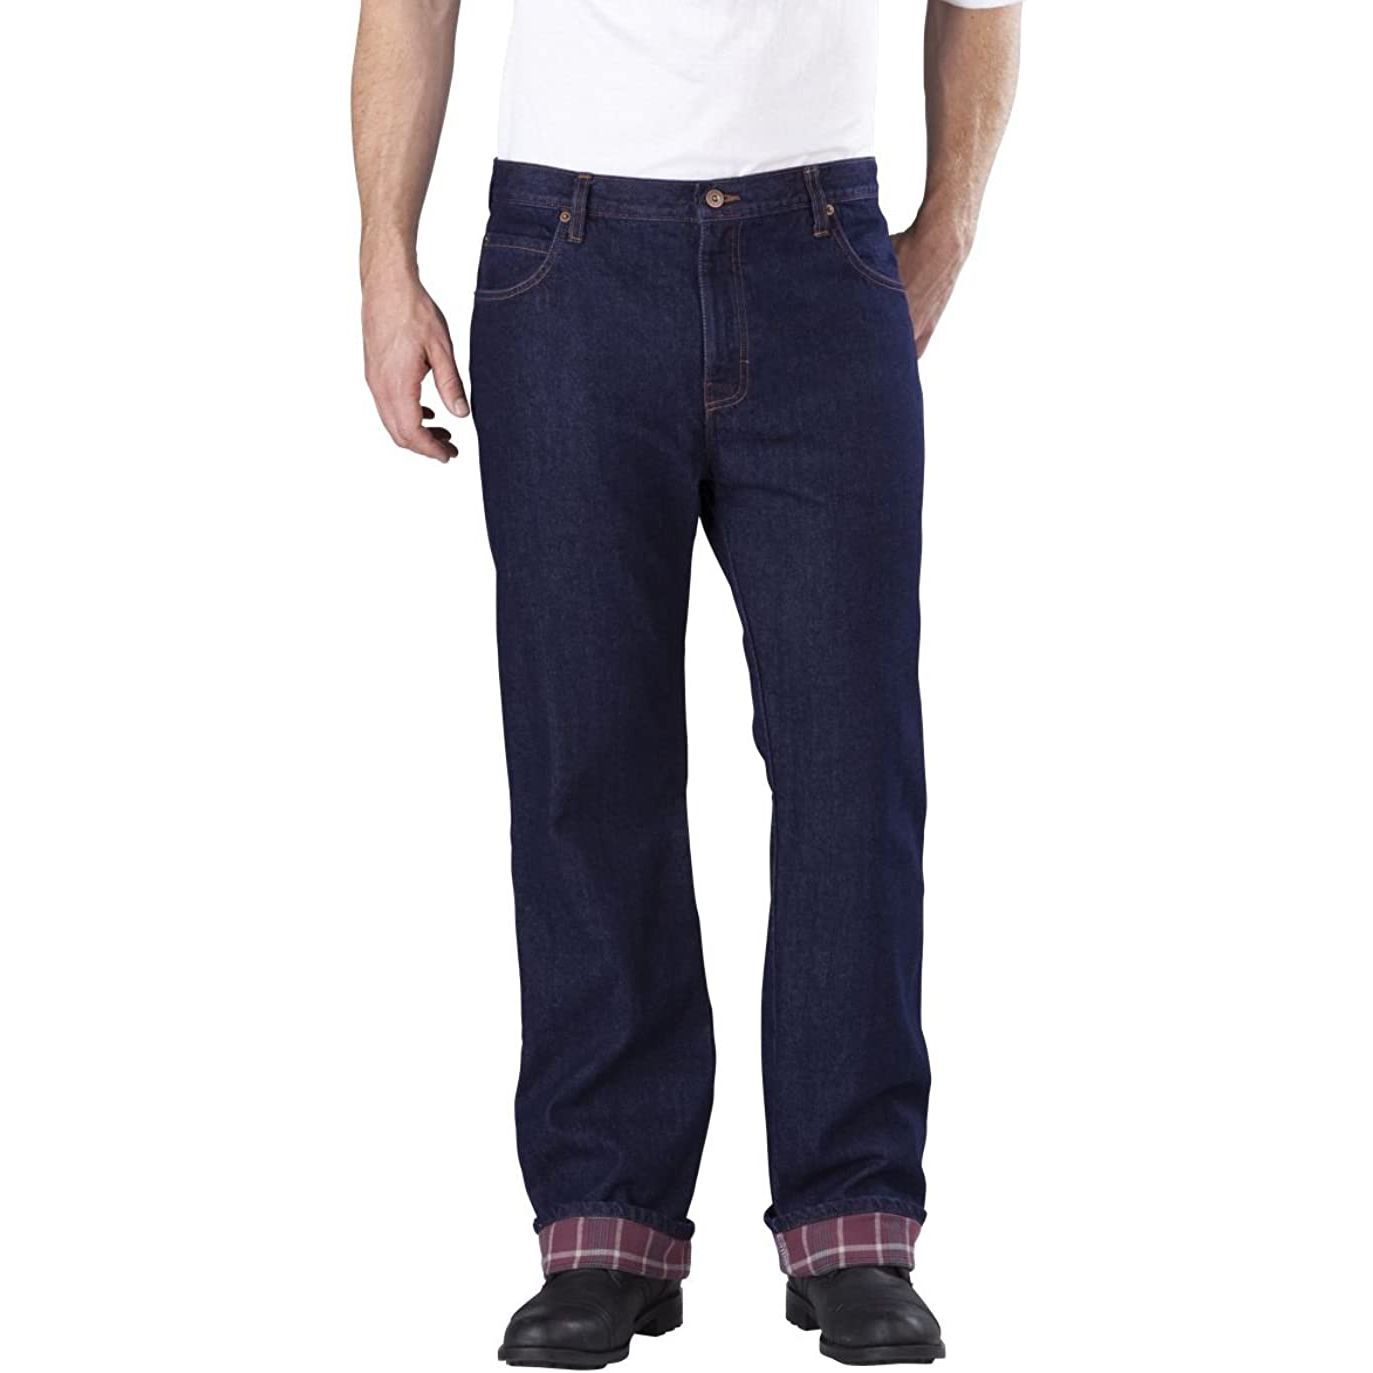 Aggregate more than 67 dickies flannel lined pants latest - in.eteachers